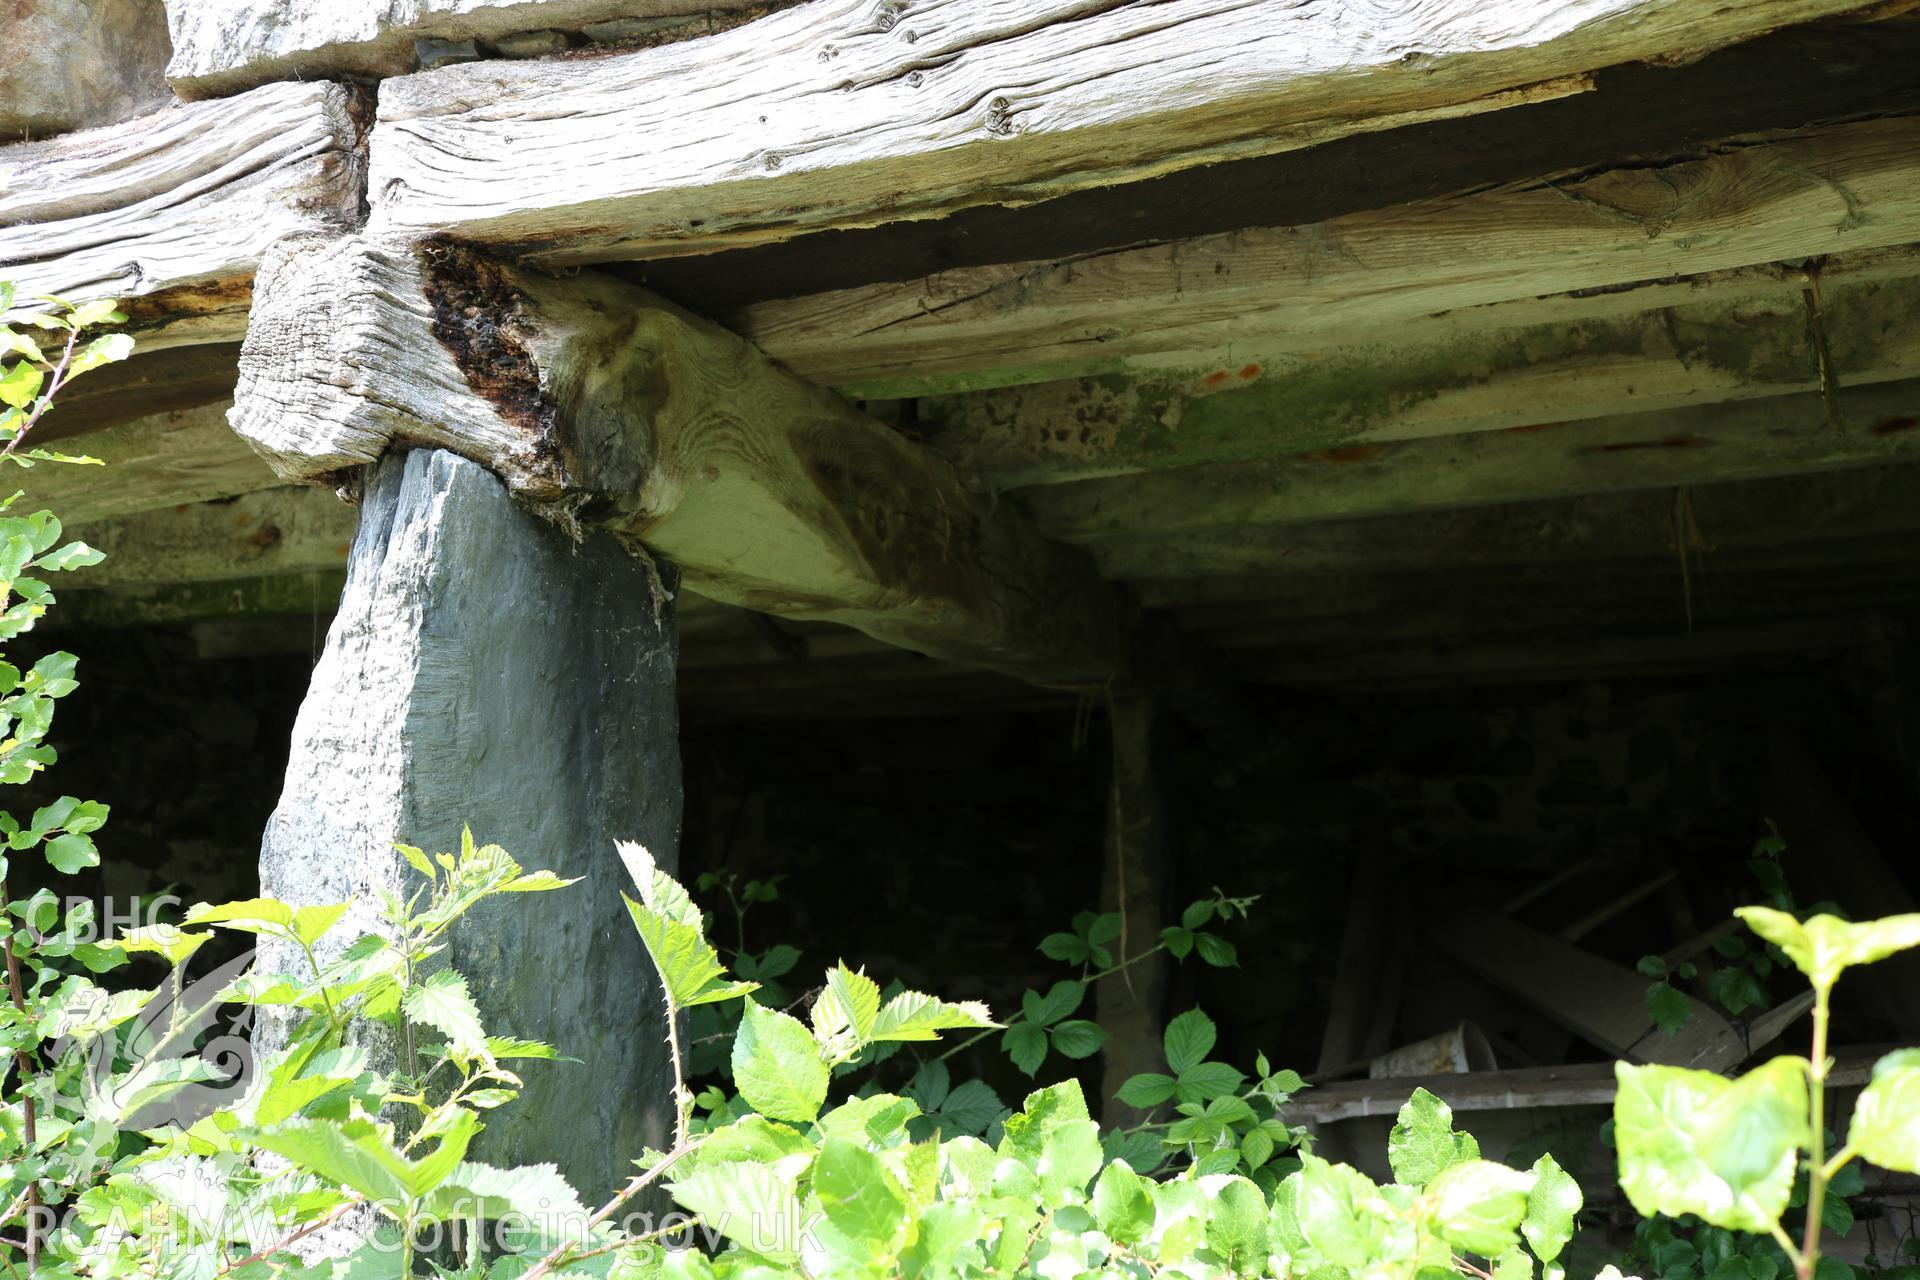 Photograph showing interior view of cartshed, at Maes yr Hendre, taken by Dr Marian Gwyn, 6th July 2016. (Original Reference no. 0274)